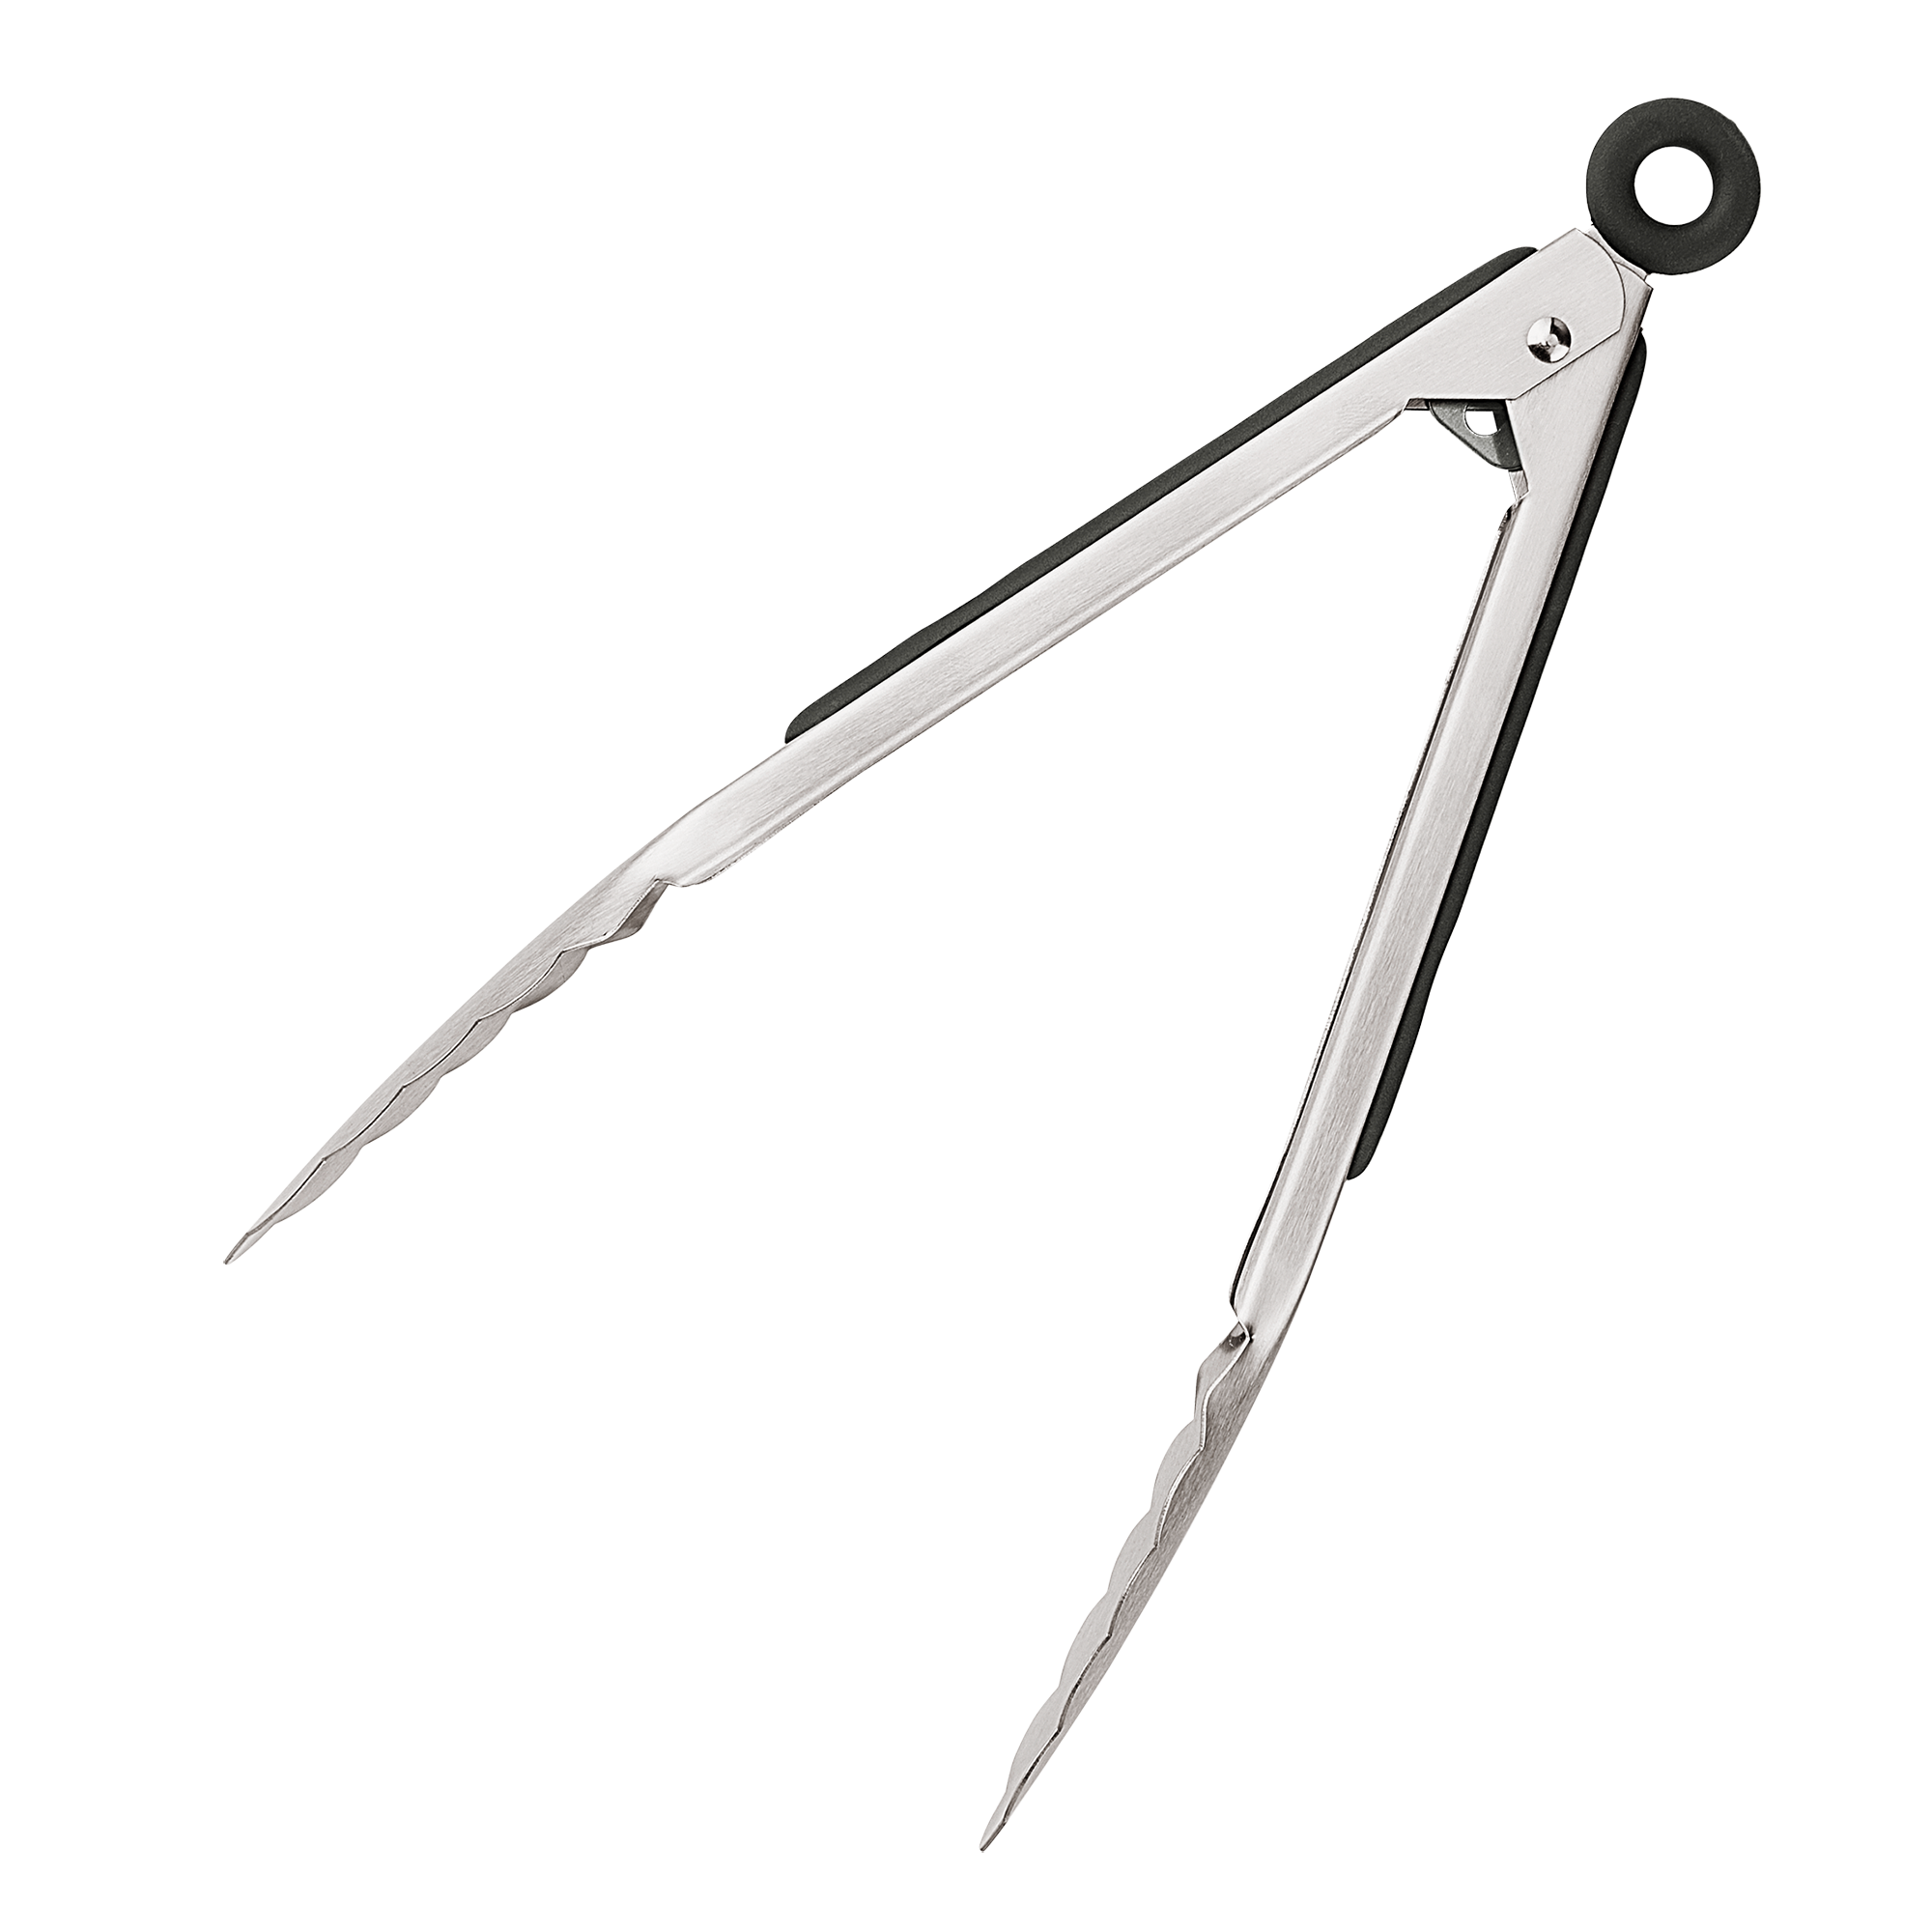 Product photo, side view, 9 inch stainless steel tongs in their open position.